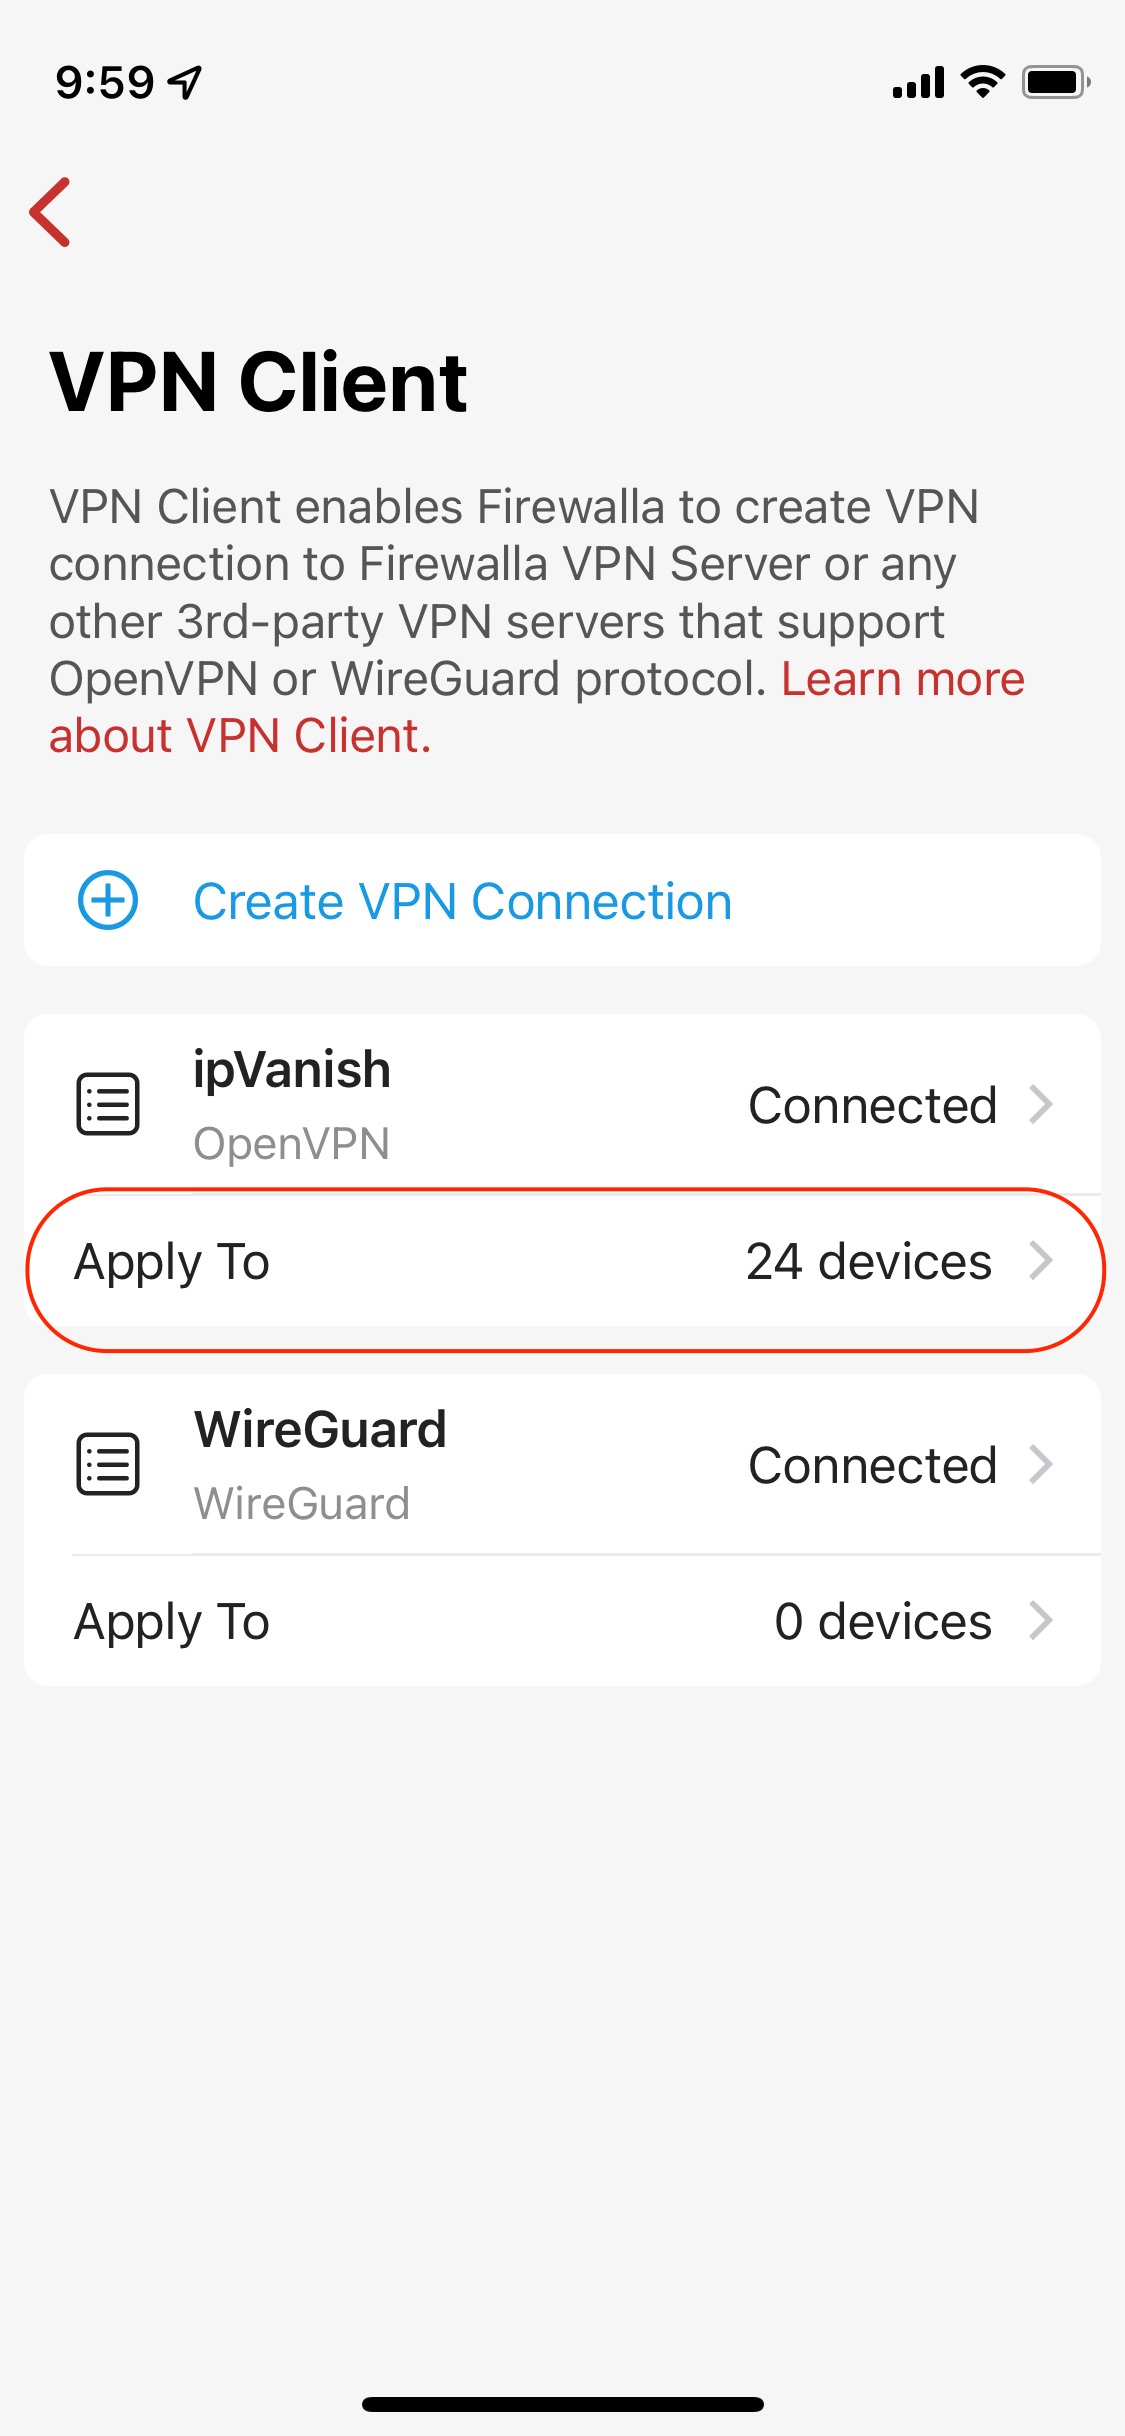 Route device traffic by setting VPN to apply to all devices